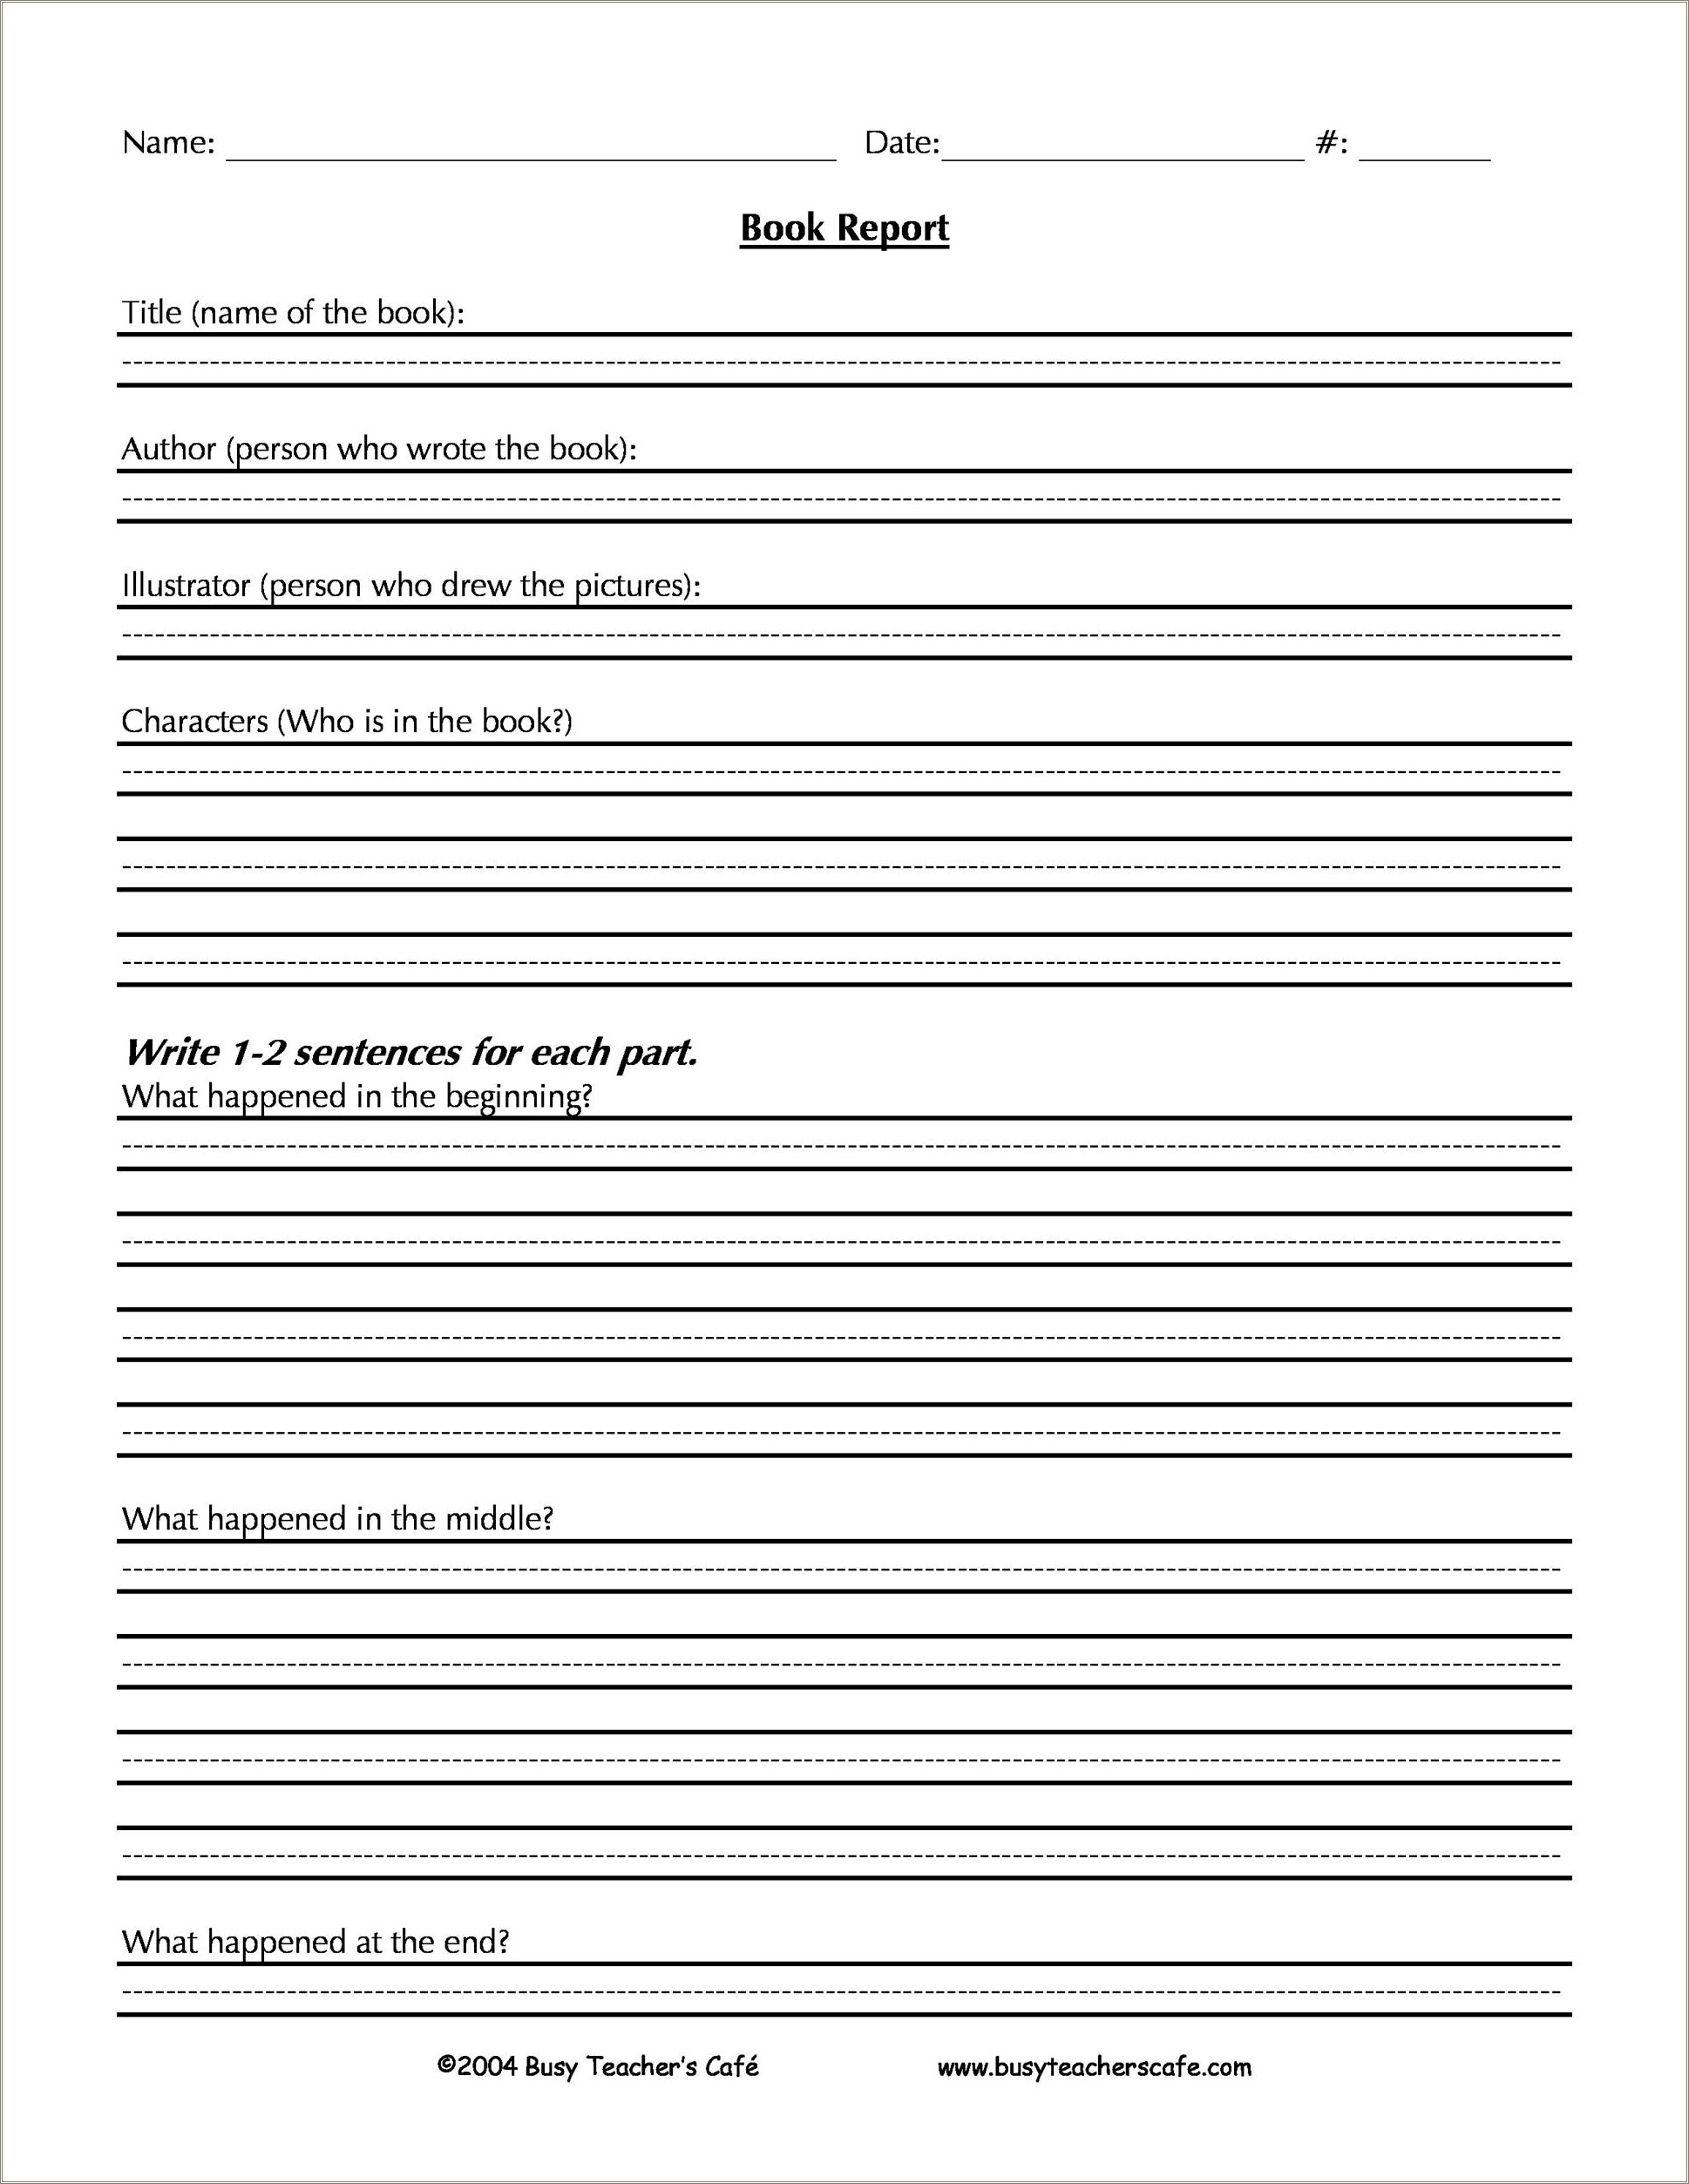 free-book-report-templates-for-6th-grade-resume-example-gallery